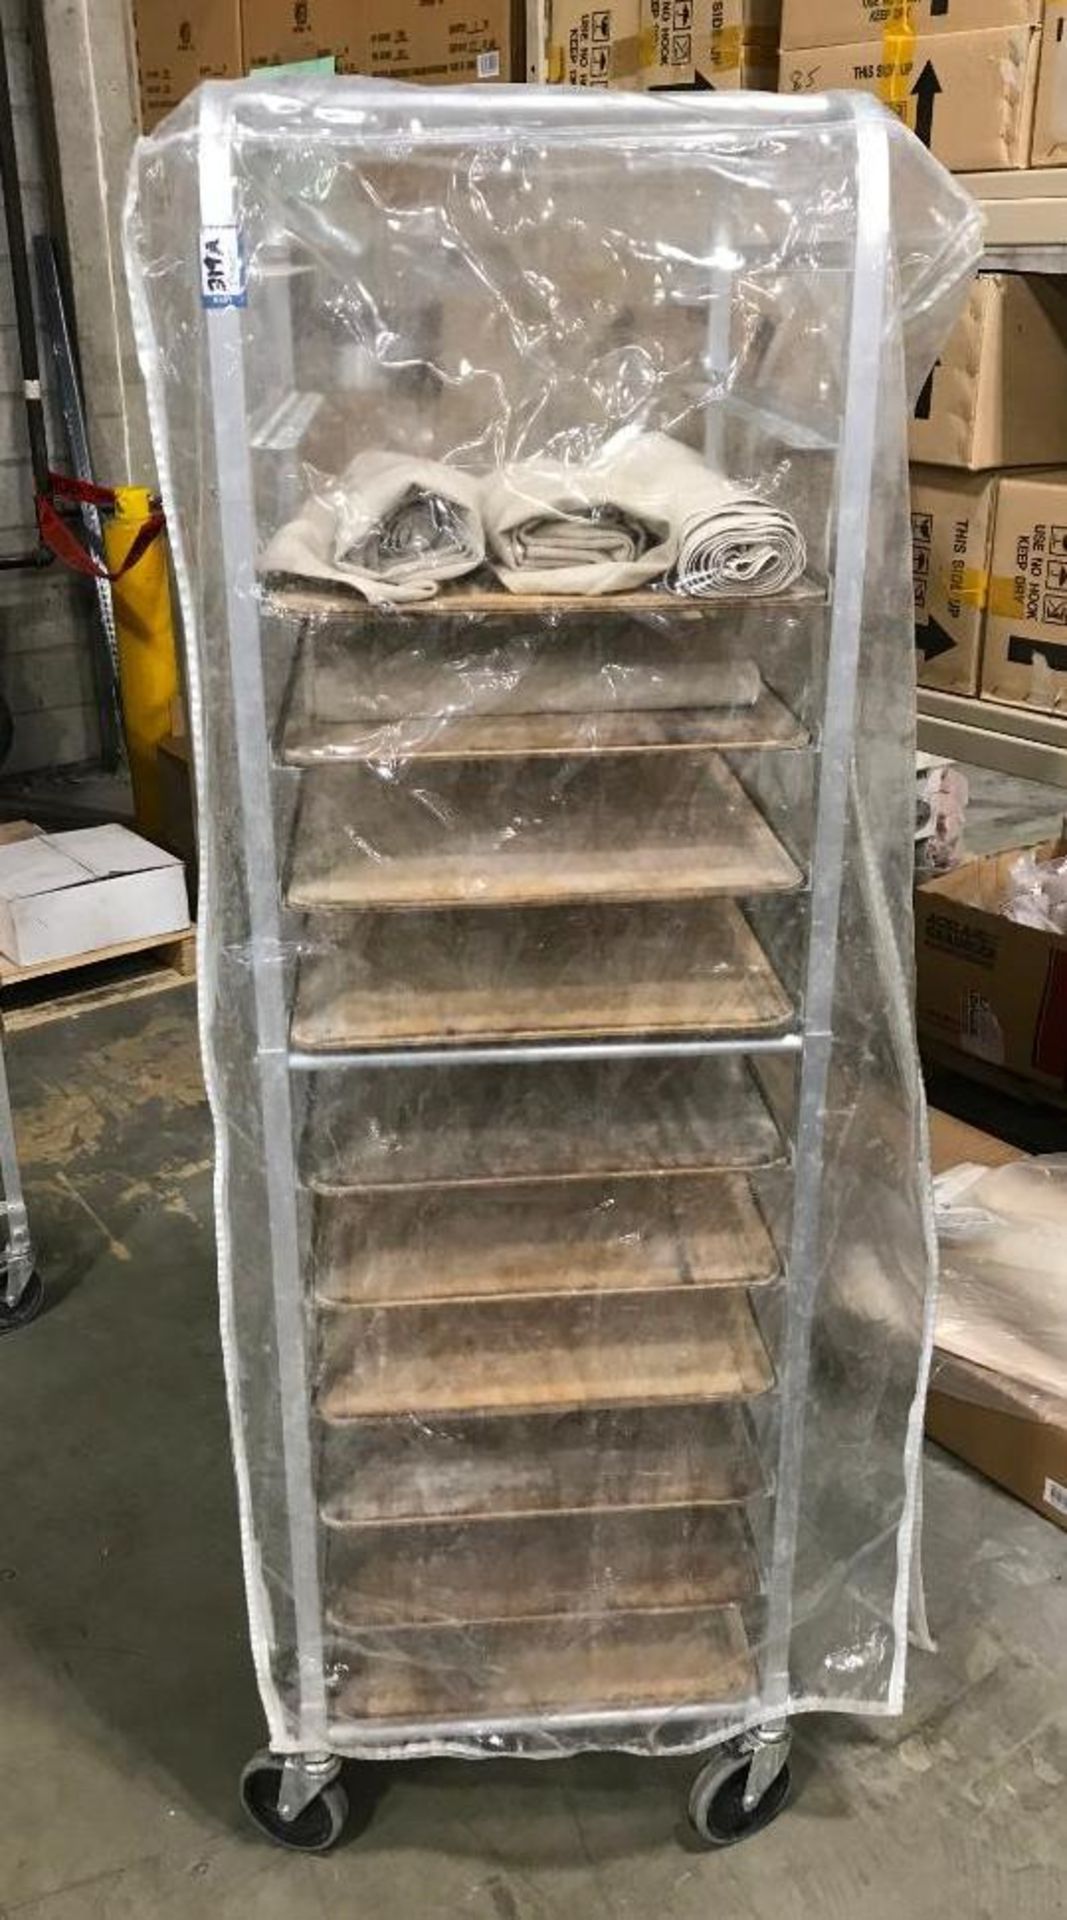 12 TIER MOBILE PAN RACK WITH 10 WOODEN PROOFING BOARDS & 4 BAKERS COUCHE - Image 6 of 6